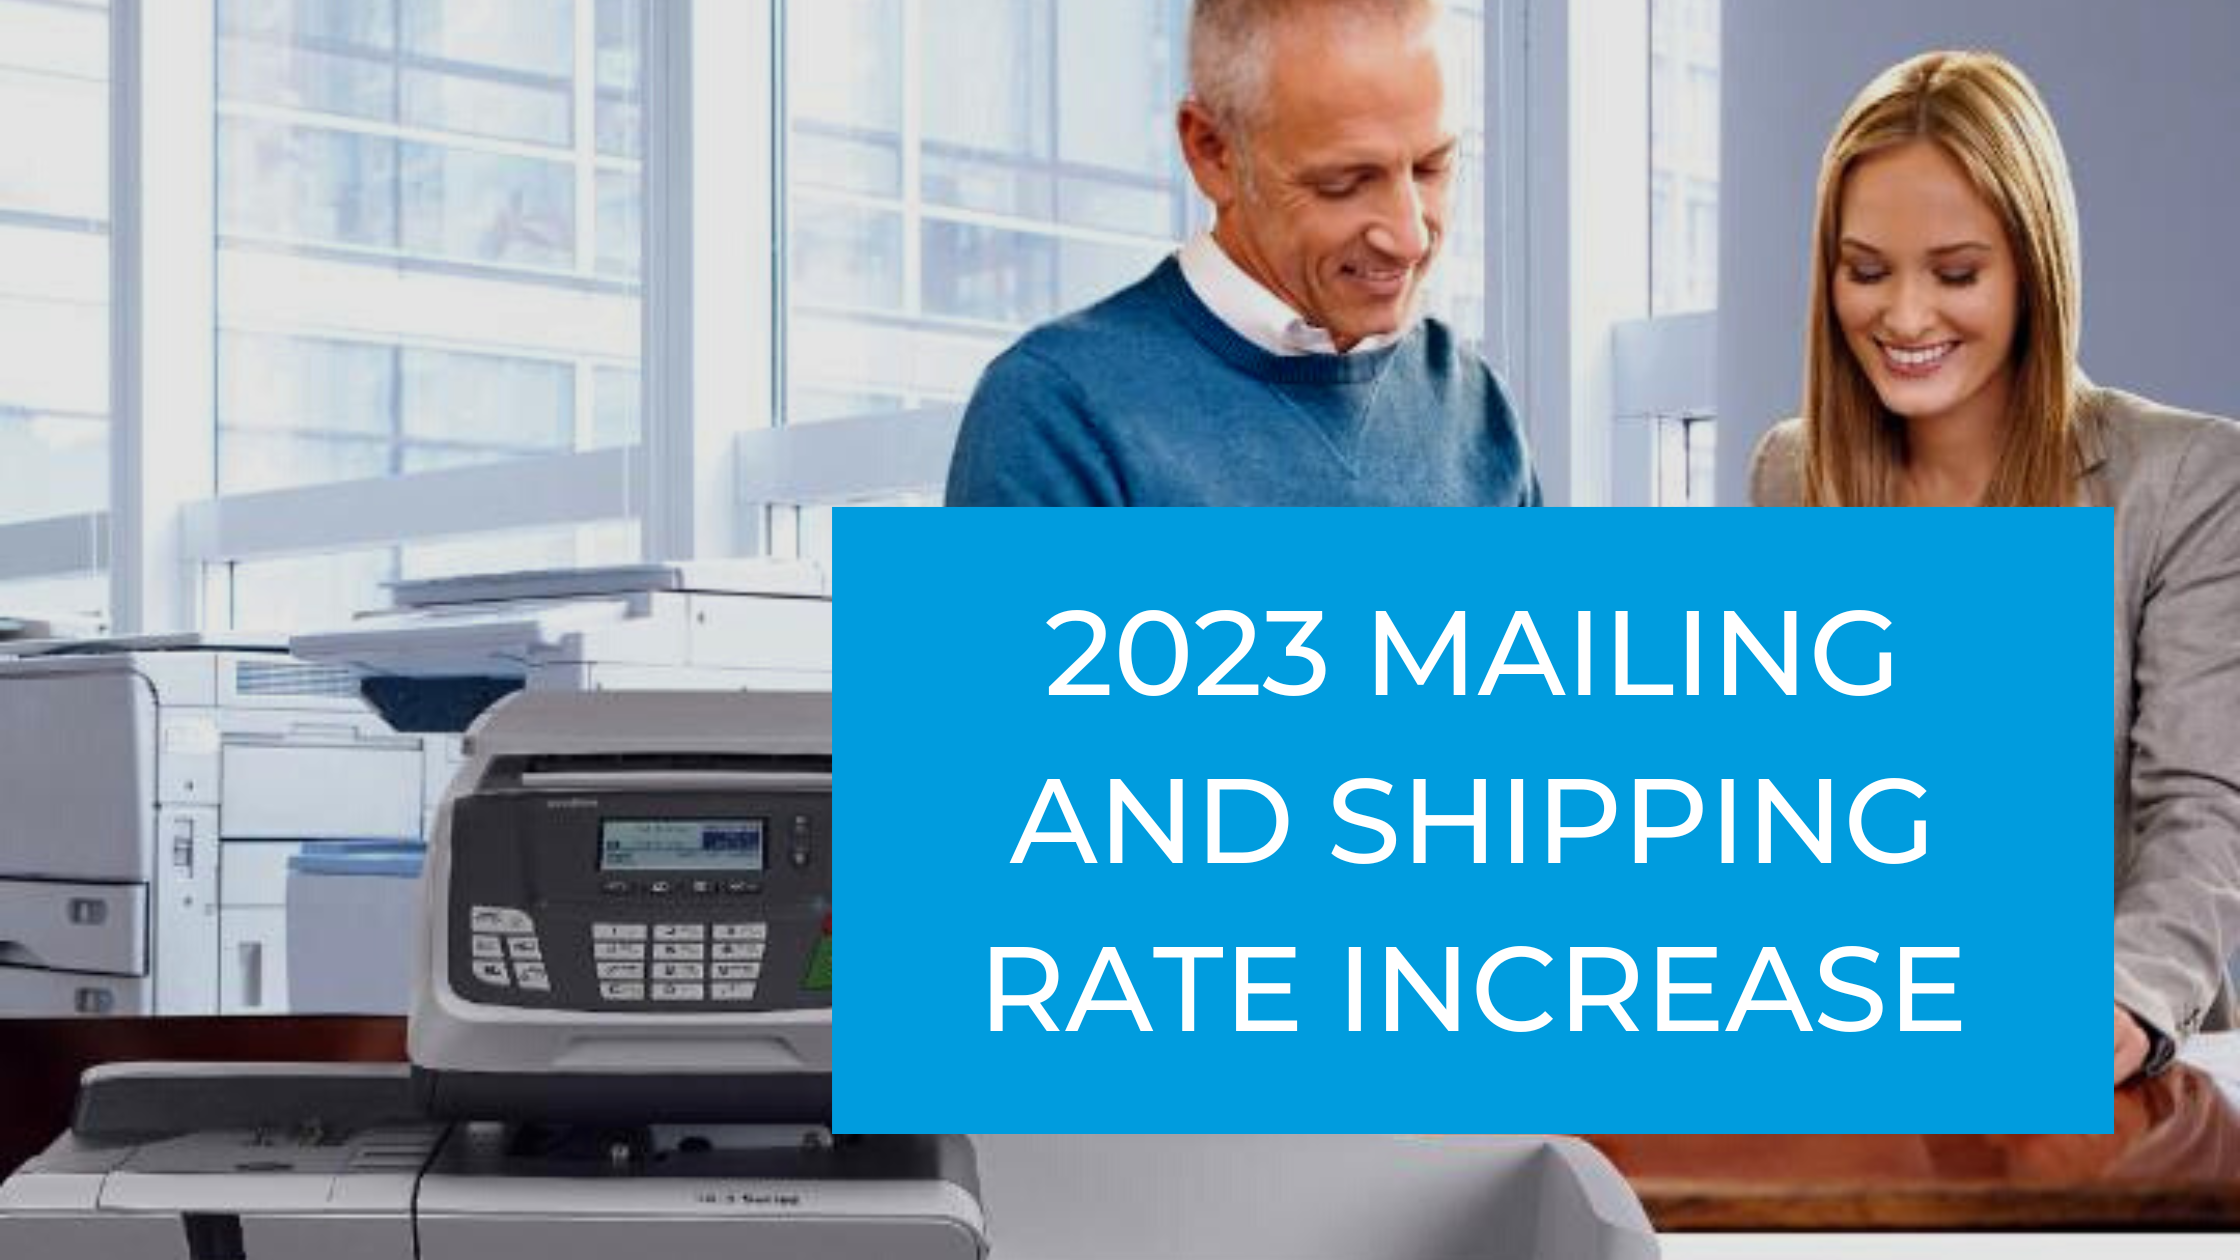 2023 Mailing and Shipping Rate Increase